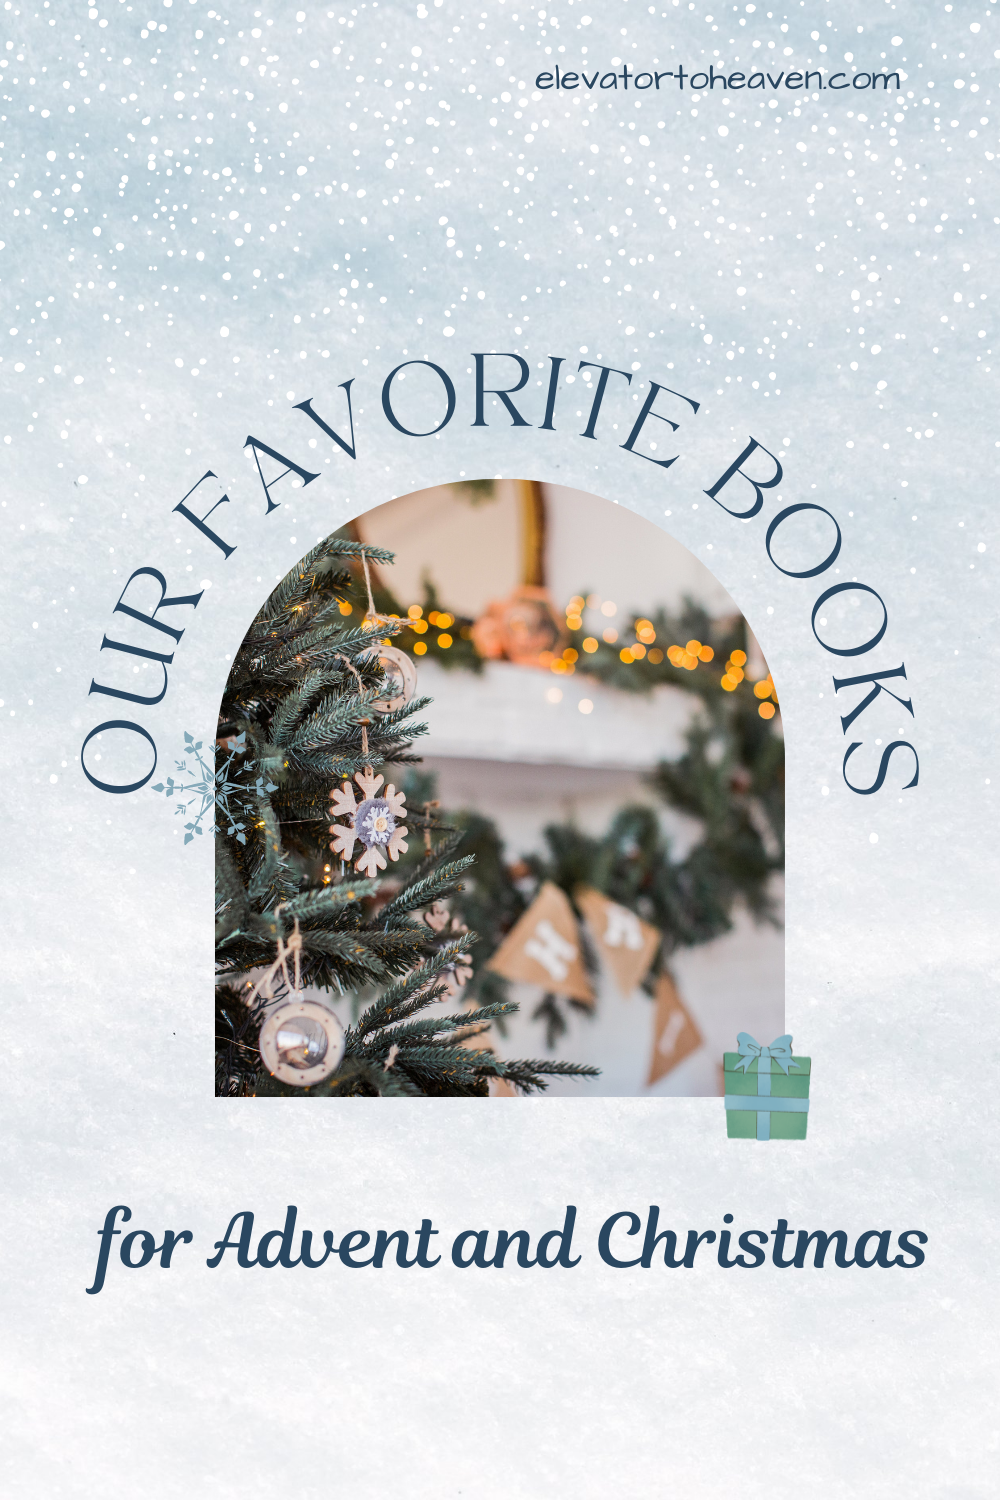 Christmas Books: Our Top Picks for Catholic Families